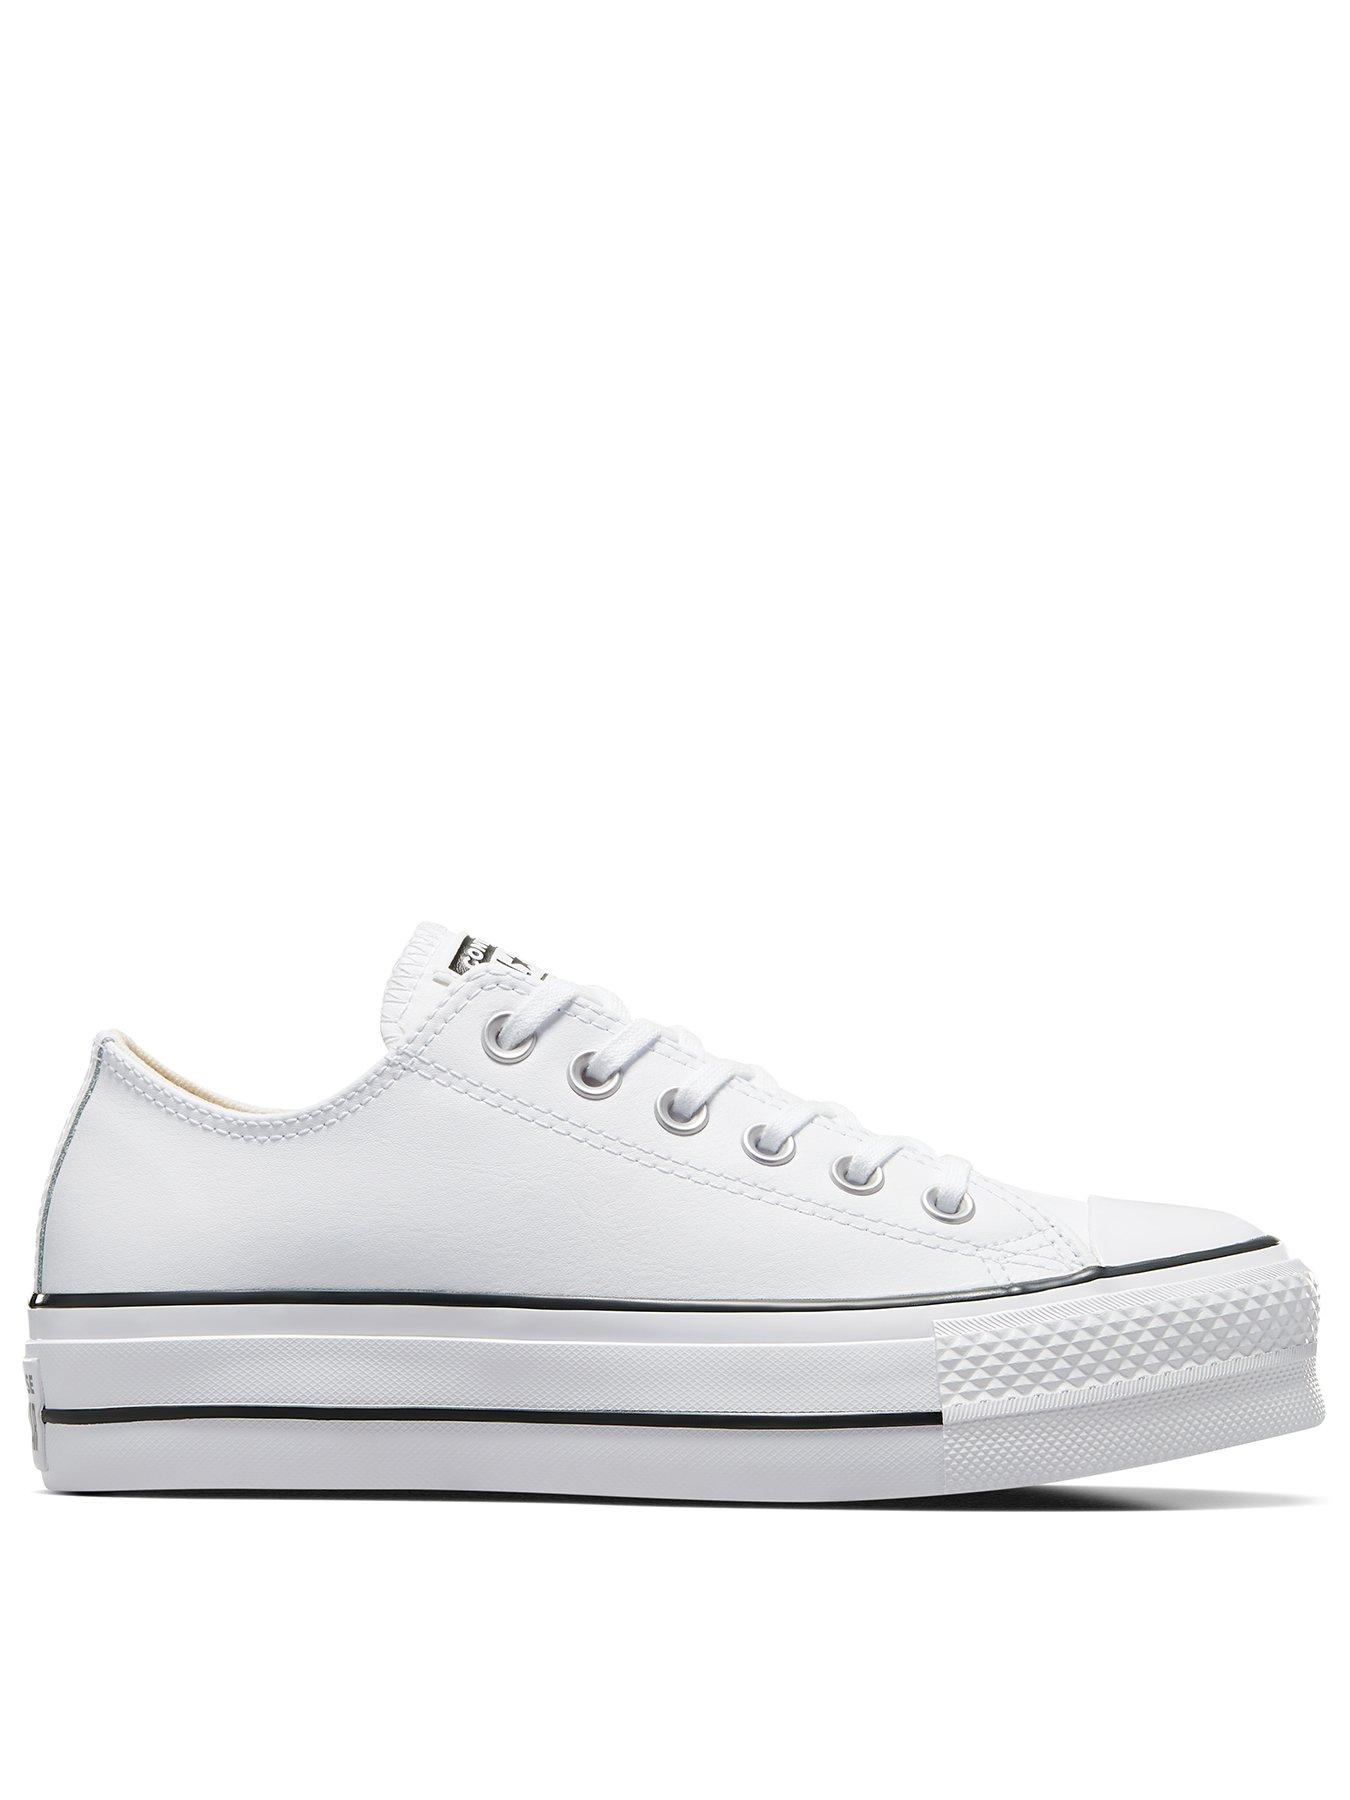 converse chuck taylor ox platform white trainers